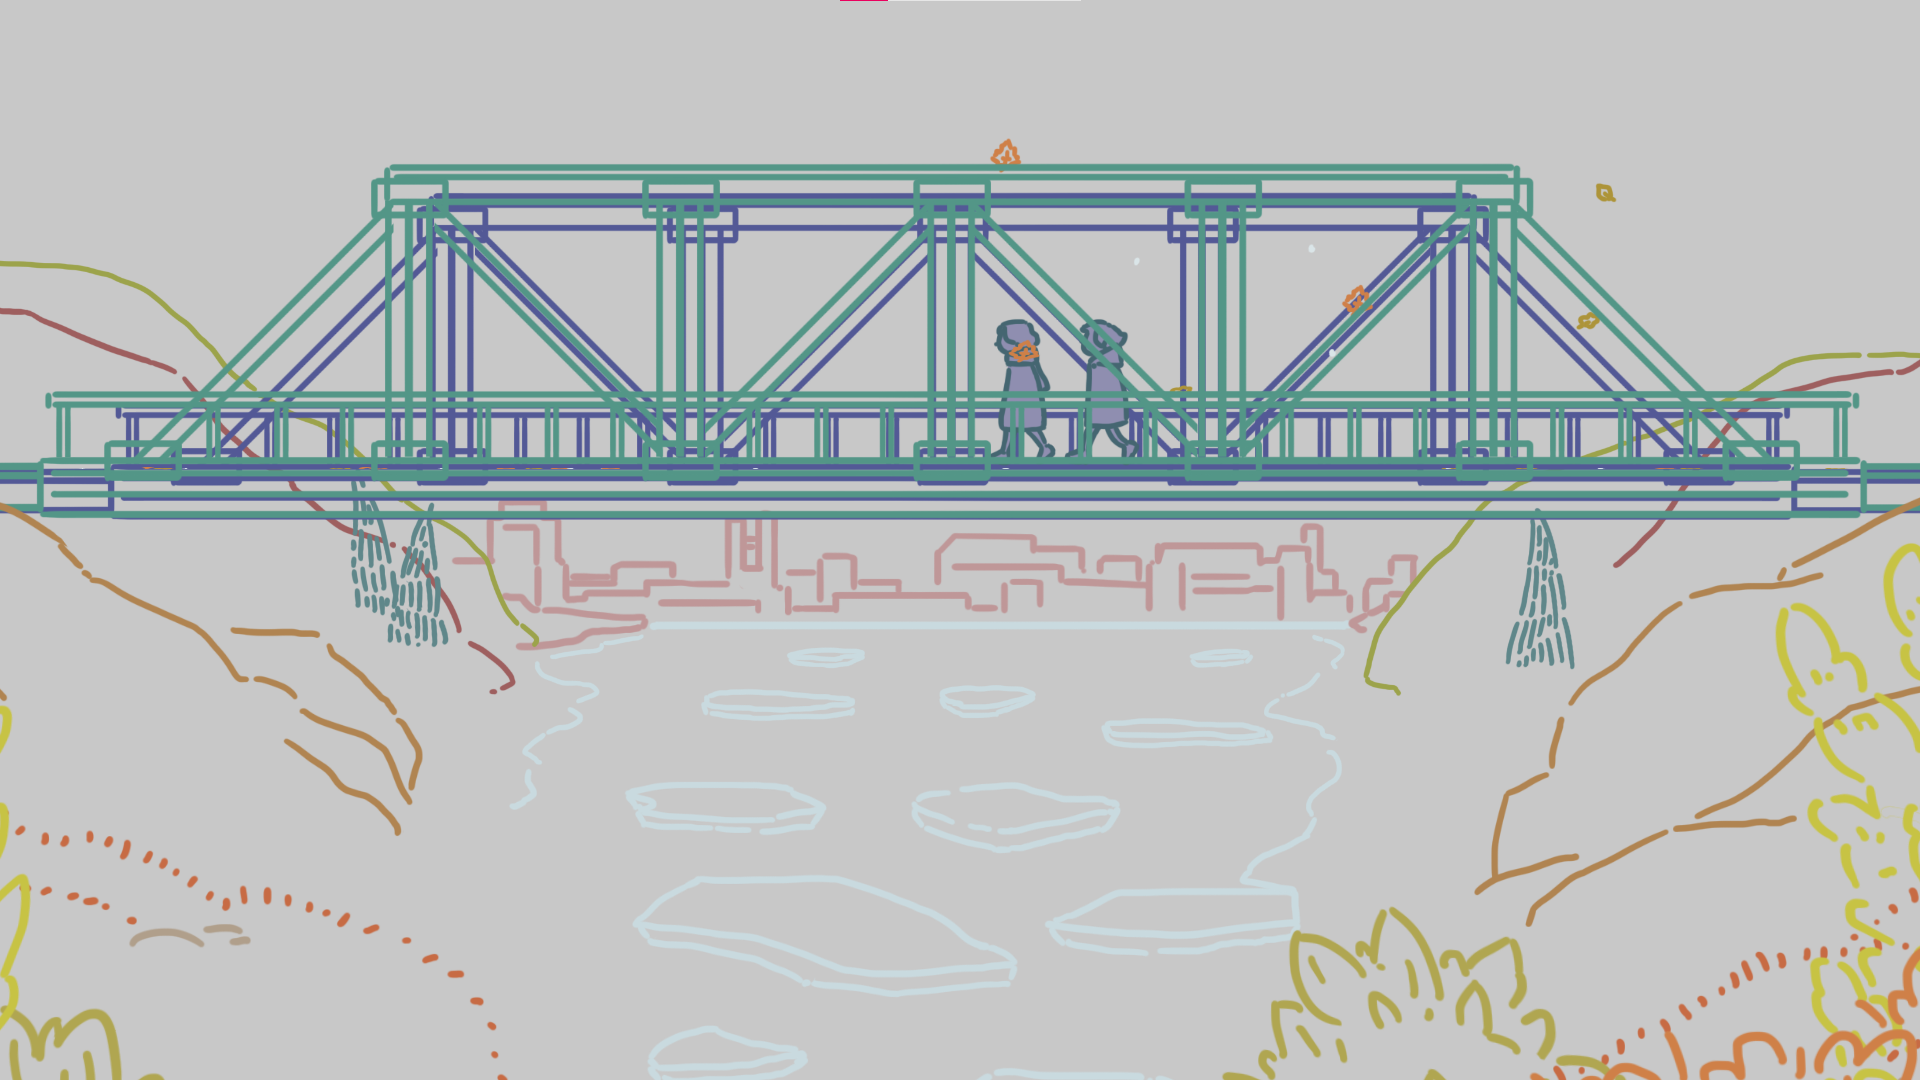 screenshot from Bridge, October 3rd: two characters walking over a bridge, with a river beneath it and the city far away in the background.